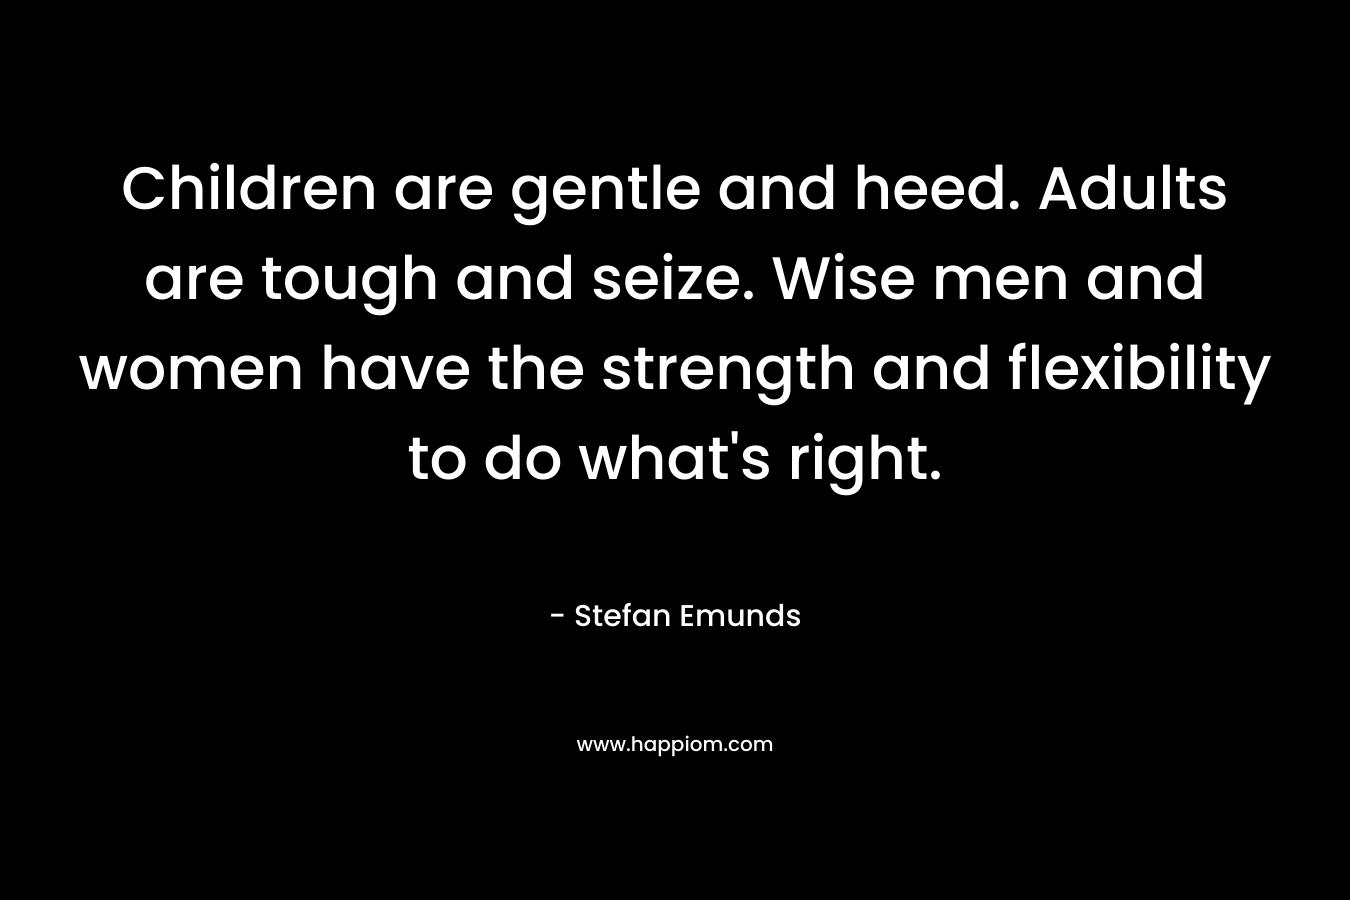 Children are gentle and heed. Adults are tough and seize. Wise men and women have the strength and flexibility to do what's right.